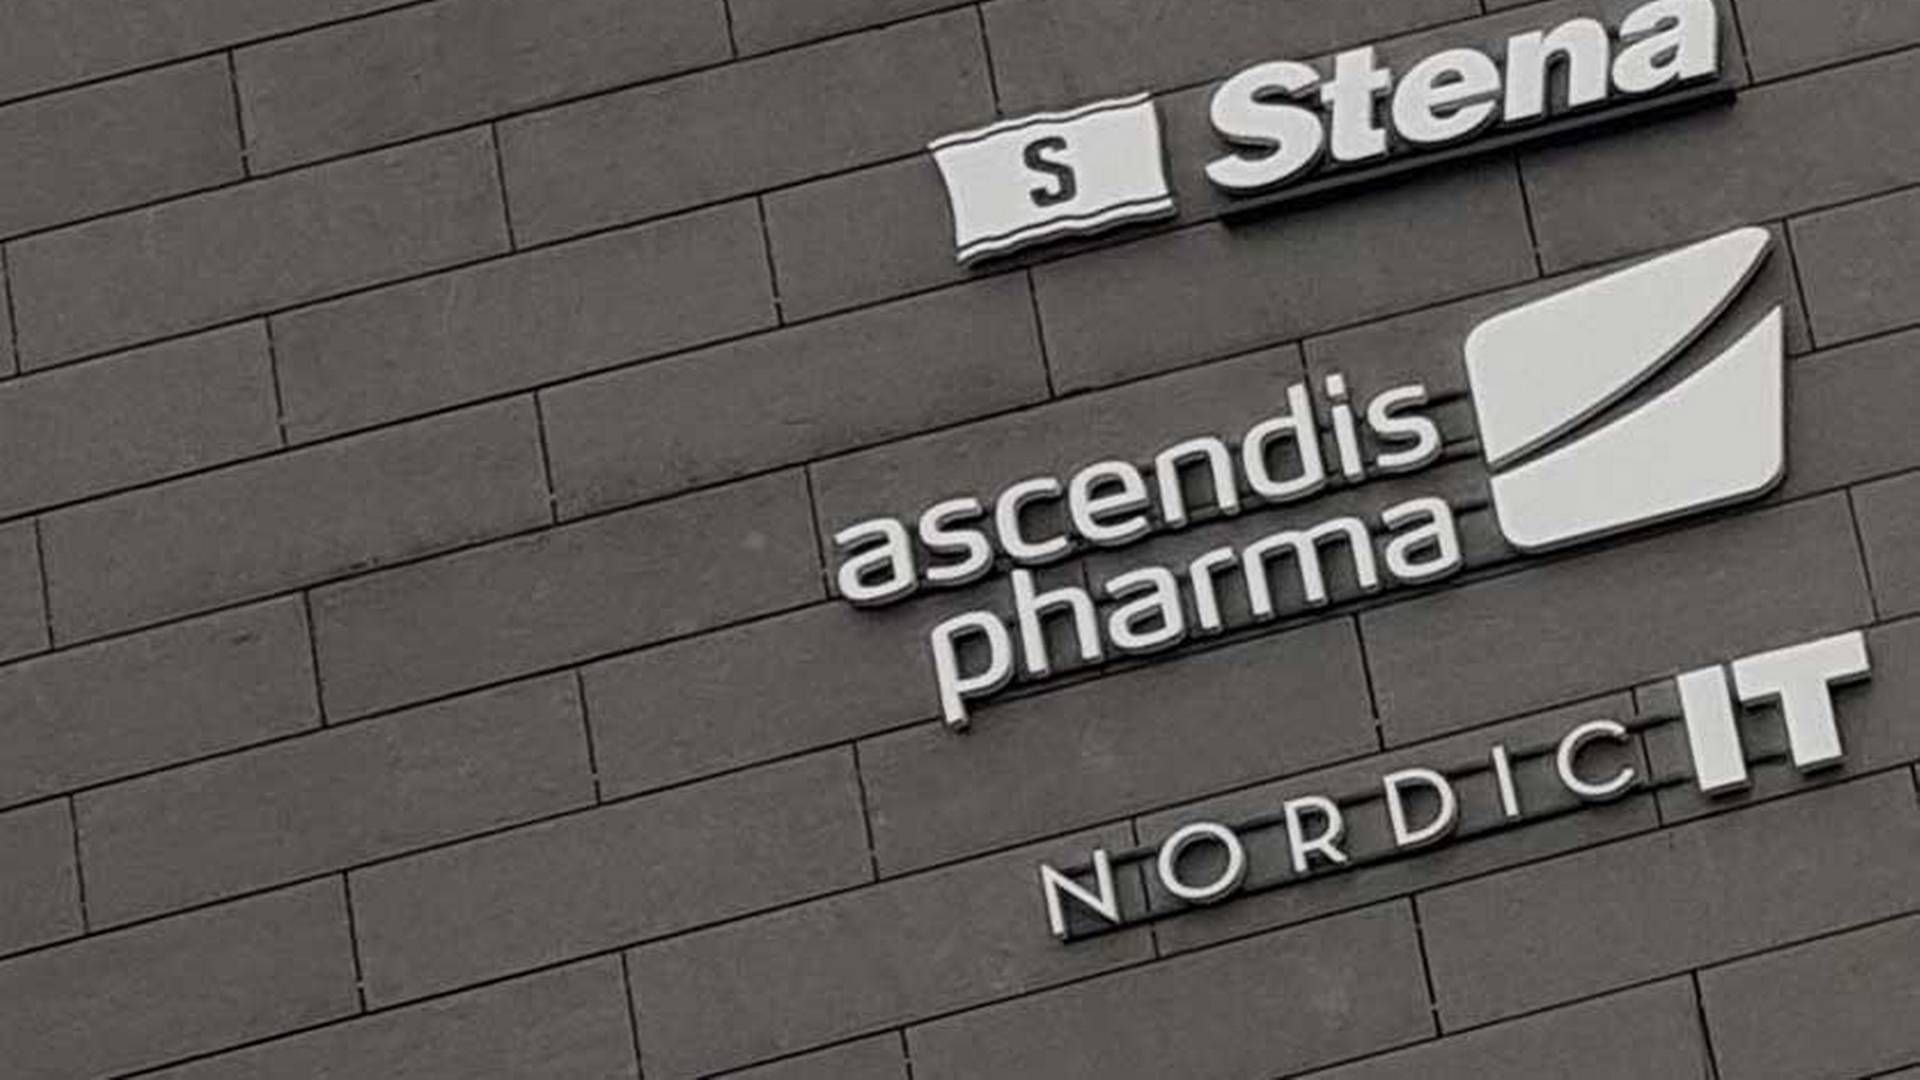 Ascendis Pharma does not have a full overview of the market potential for its drug Yorvipath in the UK, where it has just been approved. | Photo: Kevin Grønnemann / Medwatch